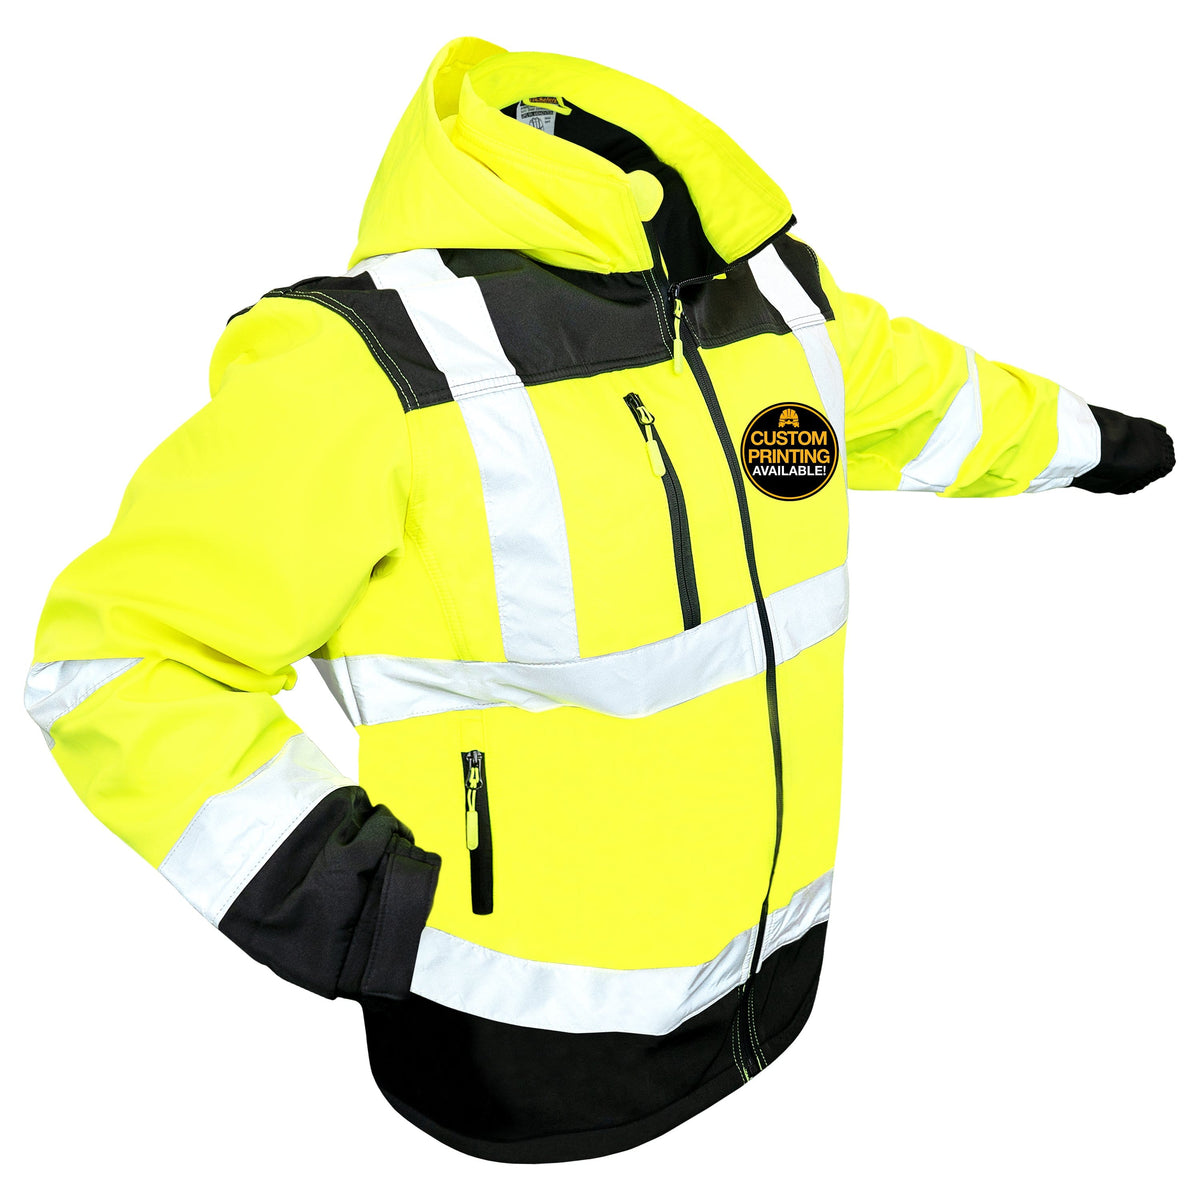 HOOD) 3 ANS AGENT Jacket Class (DETACHABLE Safety Softshell KwikSafety